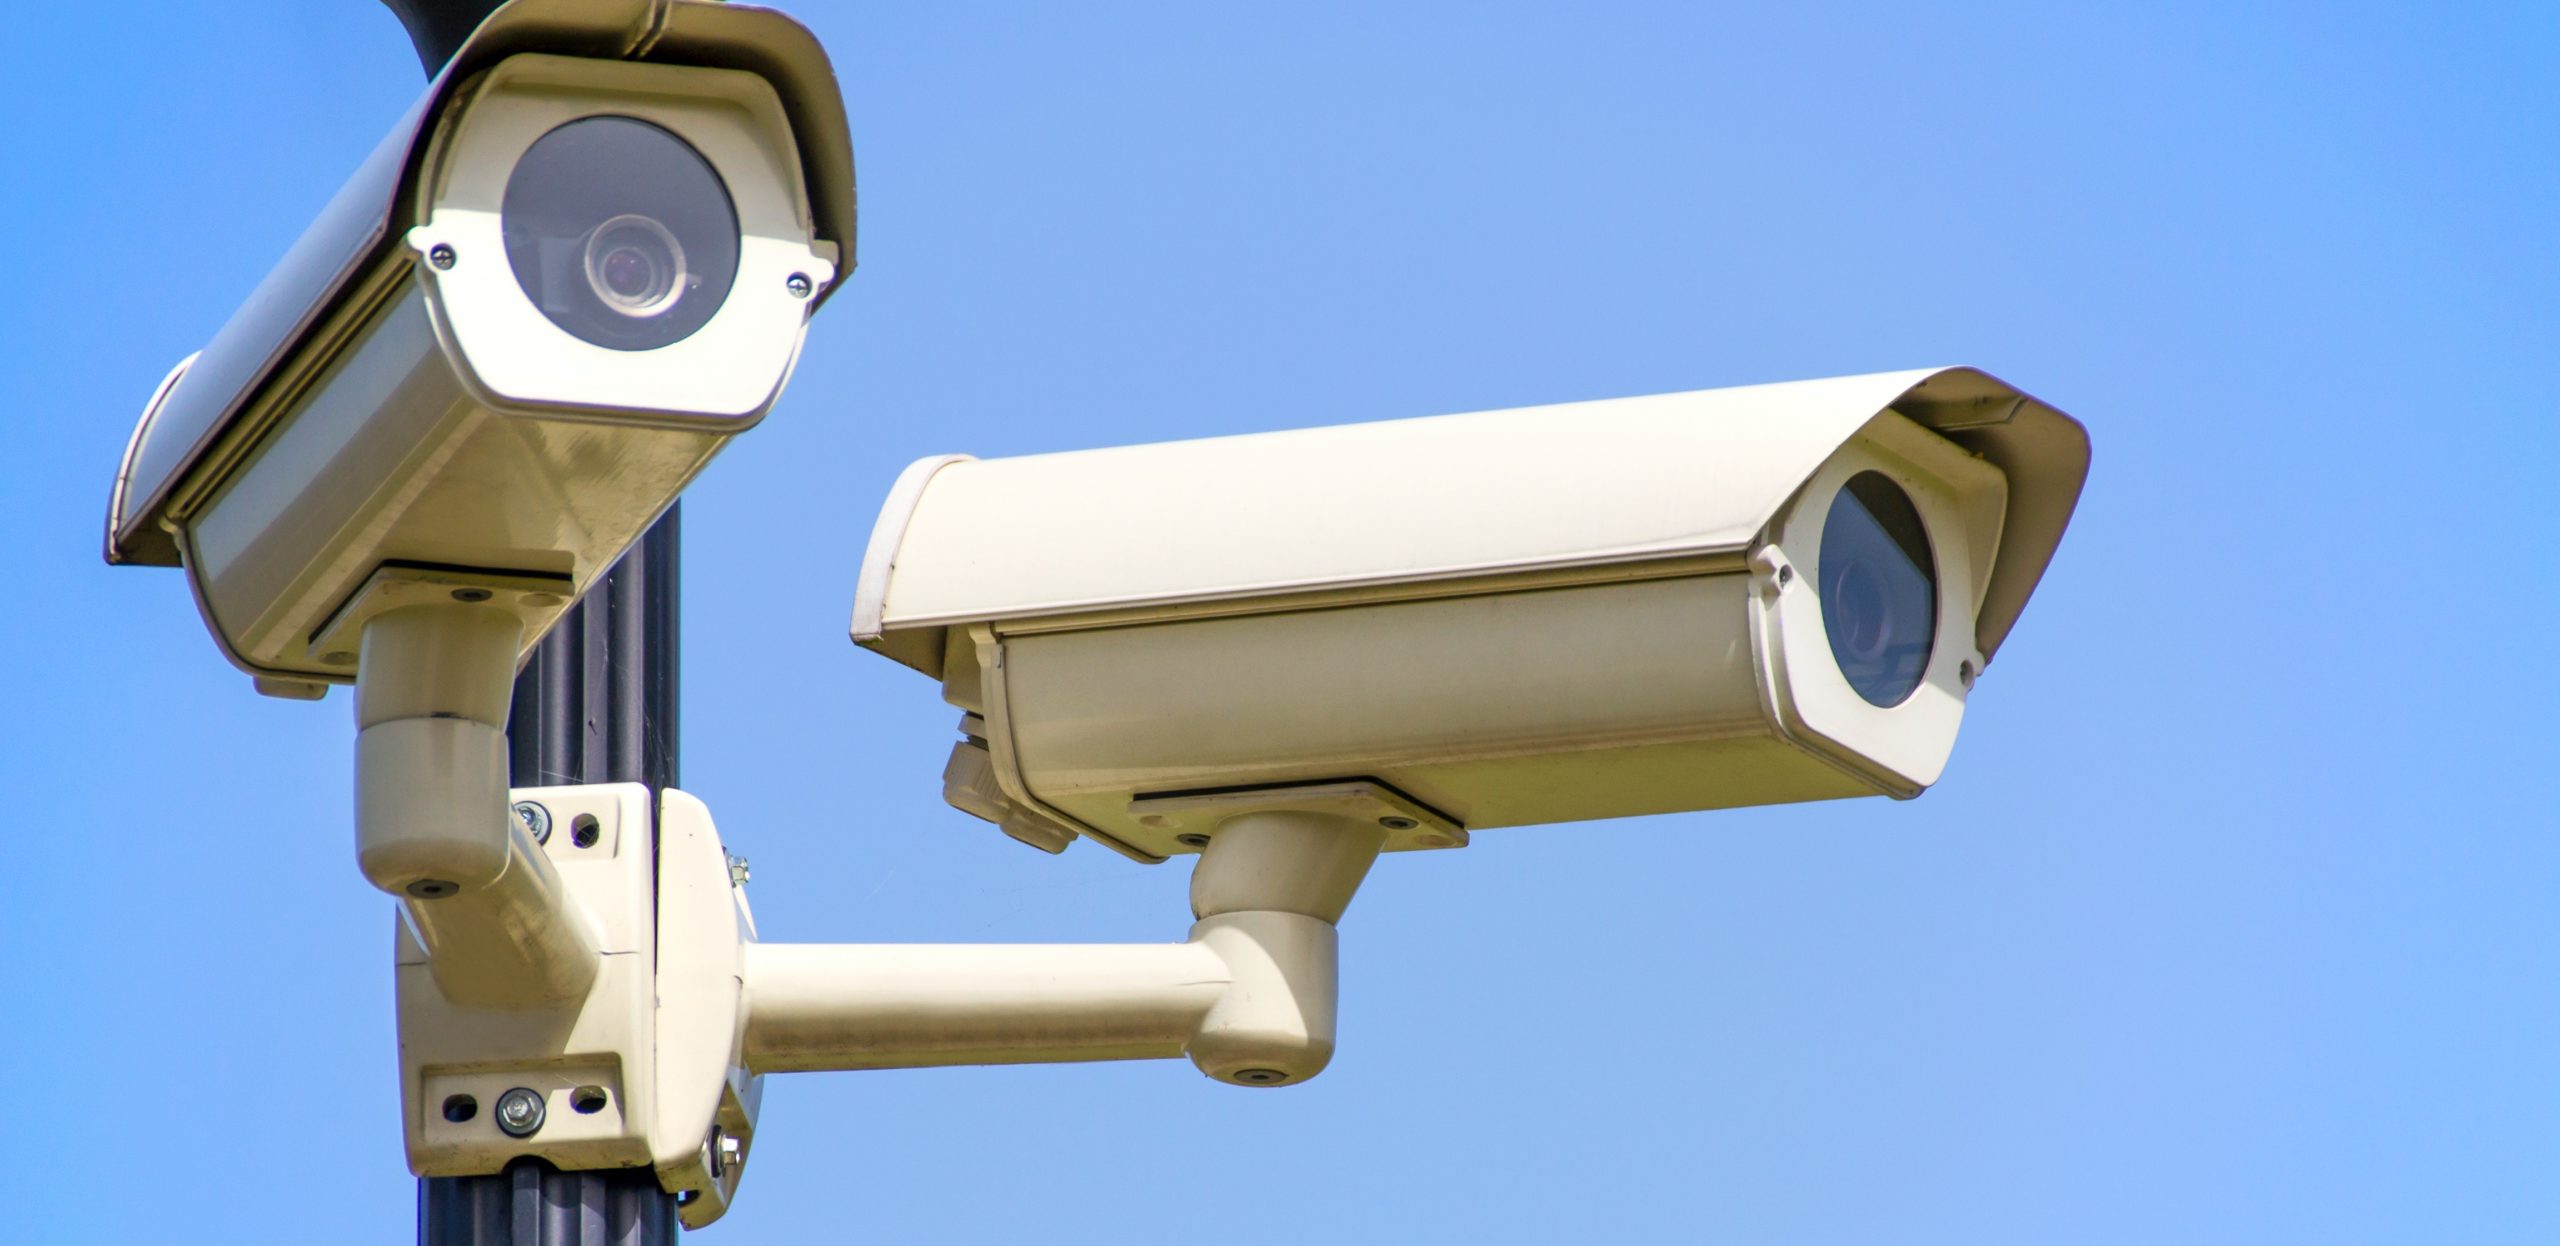 Surveillance in the Workplace